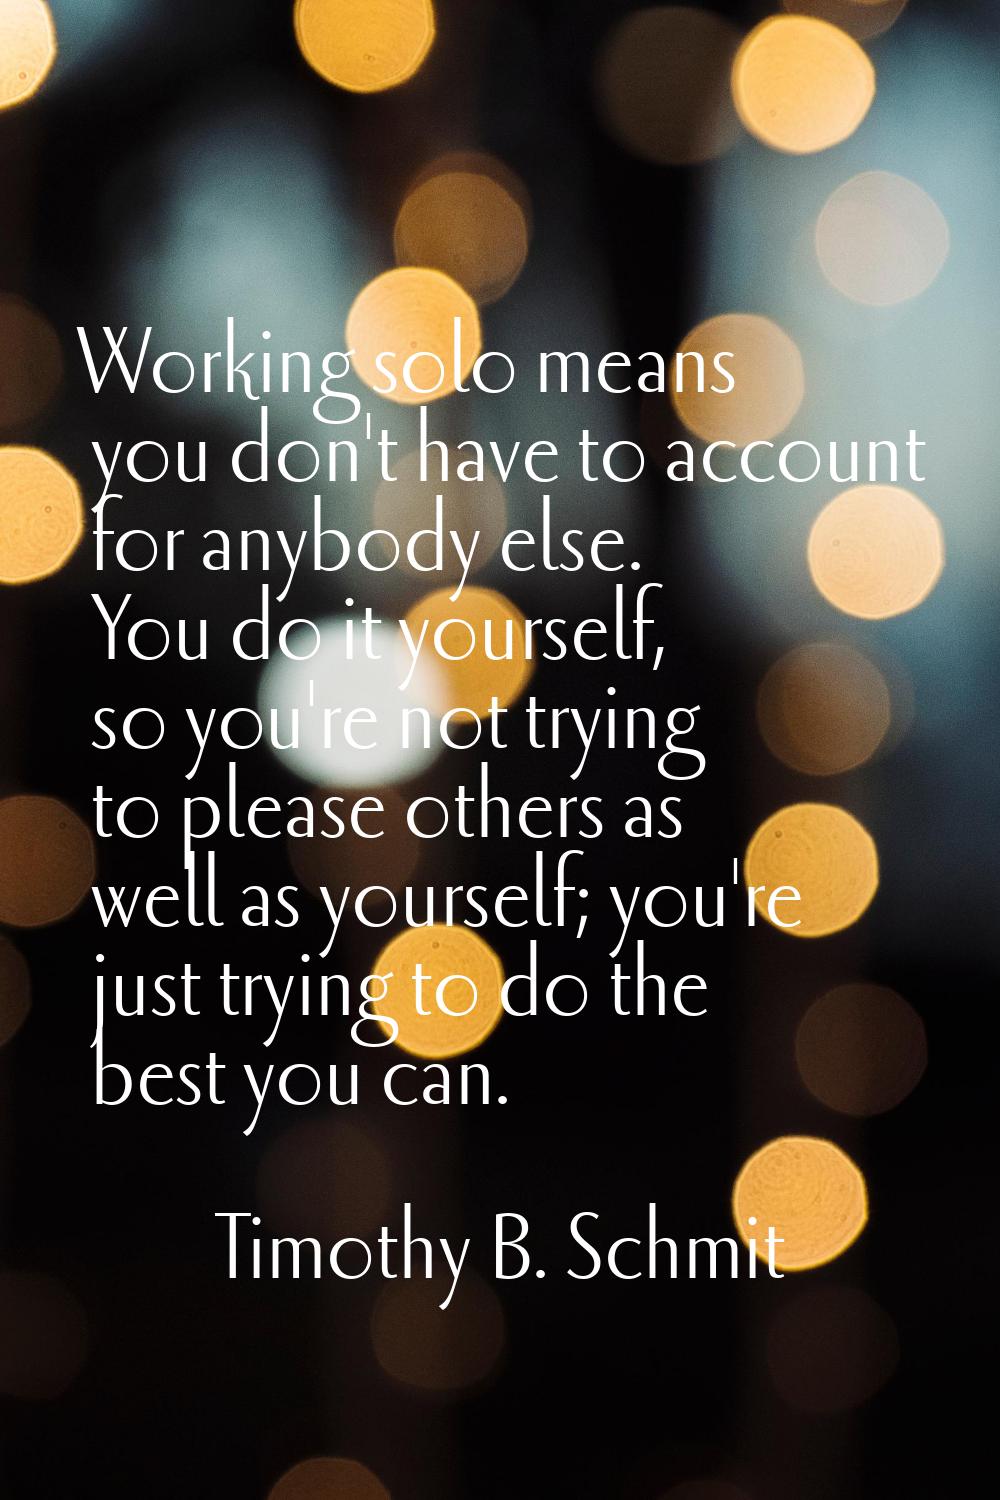 Working solo means you don't have to account for anybody else. You do it yourself, so you're not tr